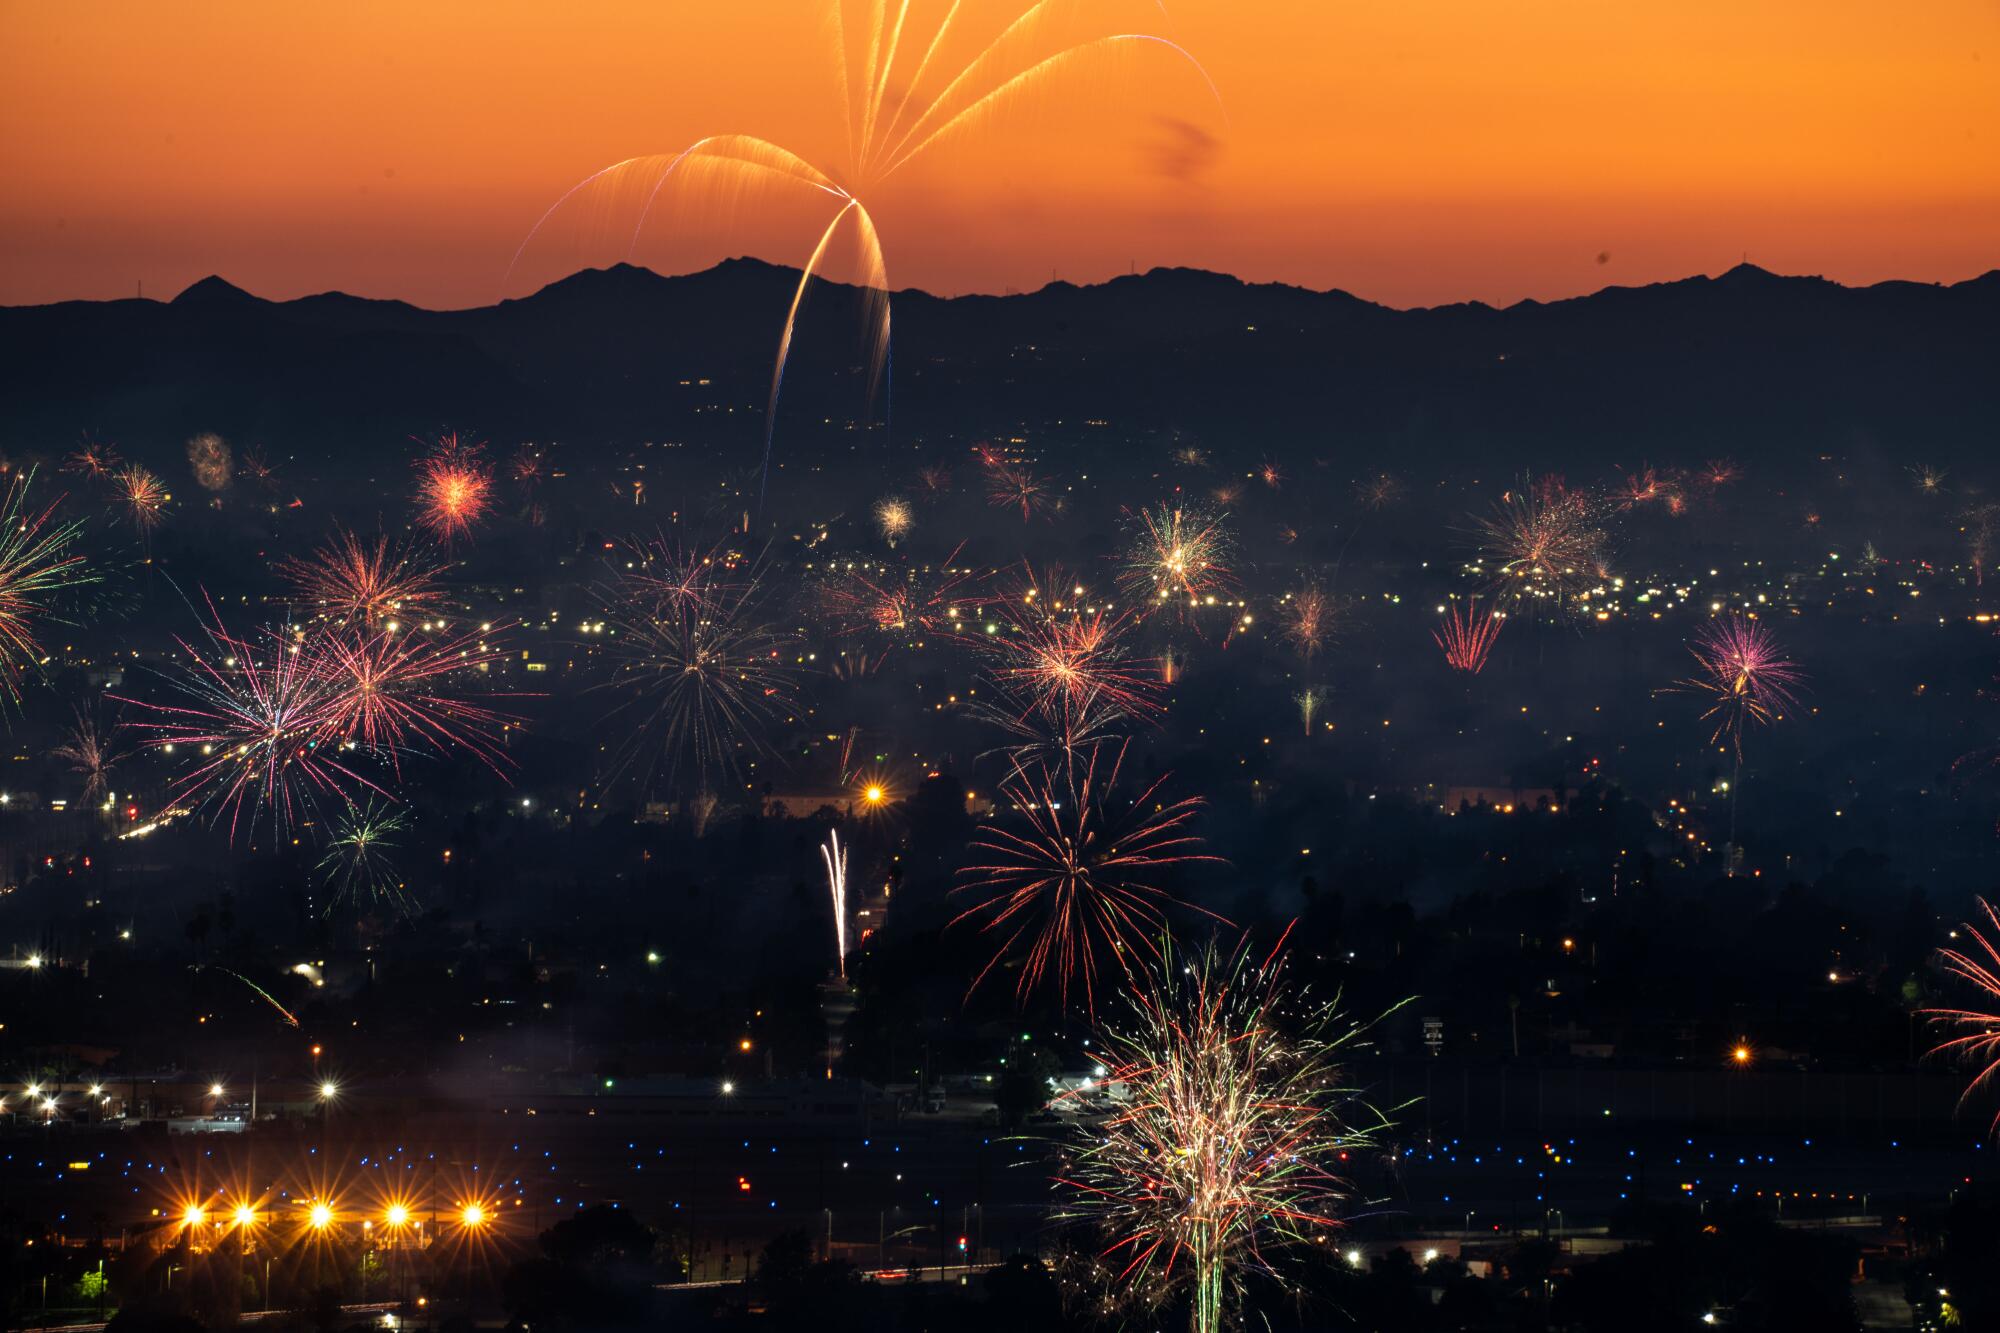 Fireworks light up the sky over North Hollywood, as seen from Burbank.